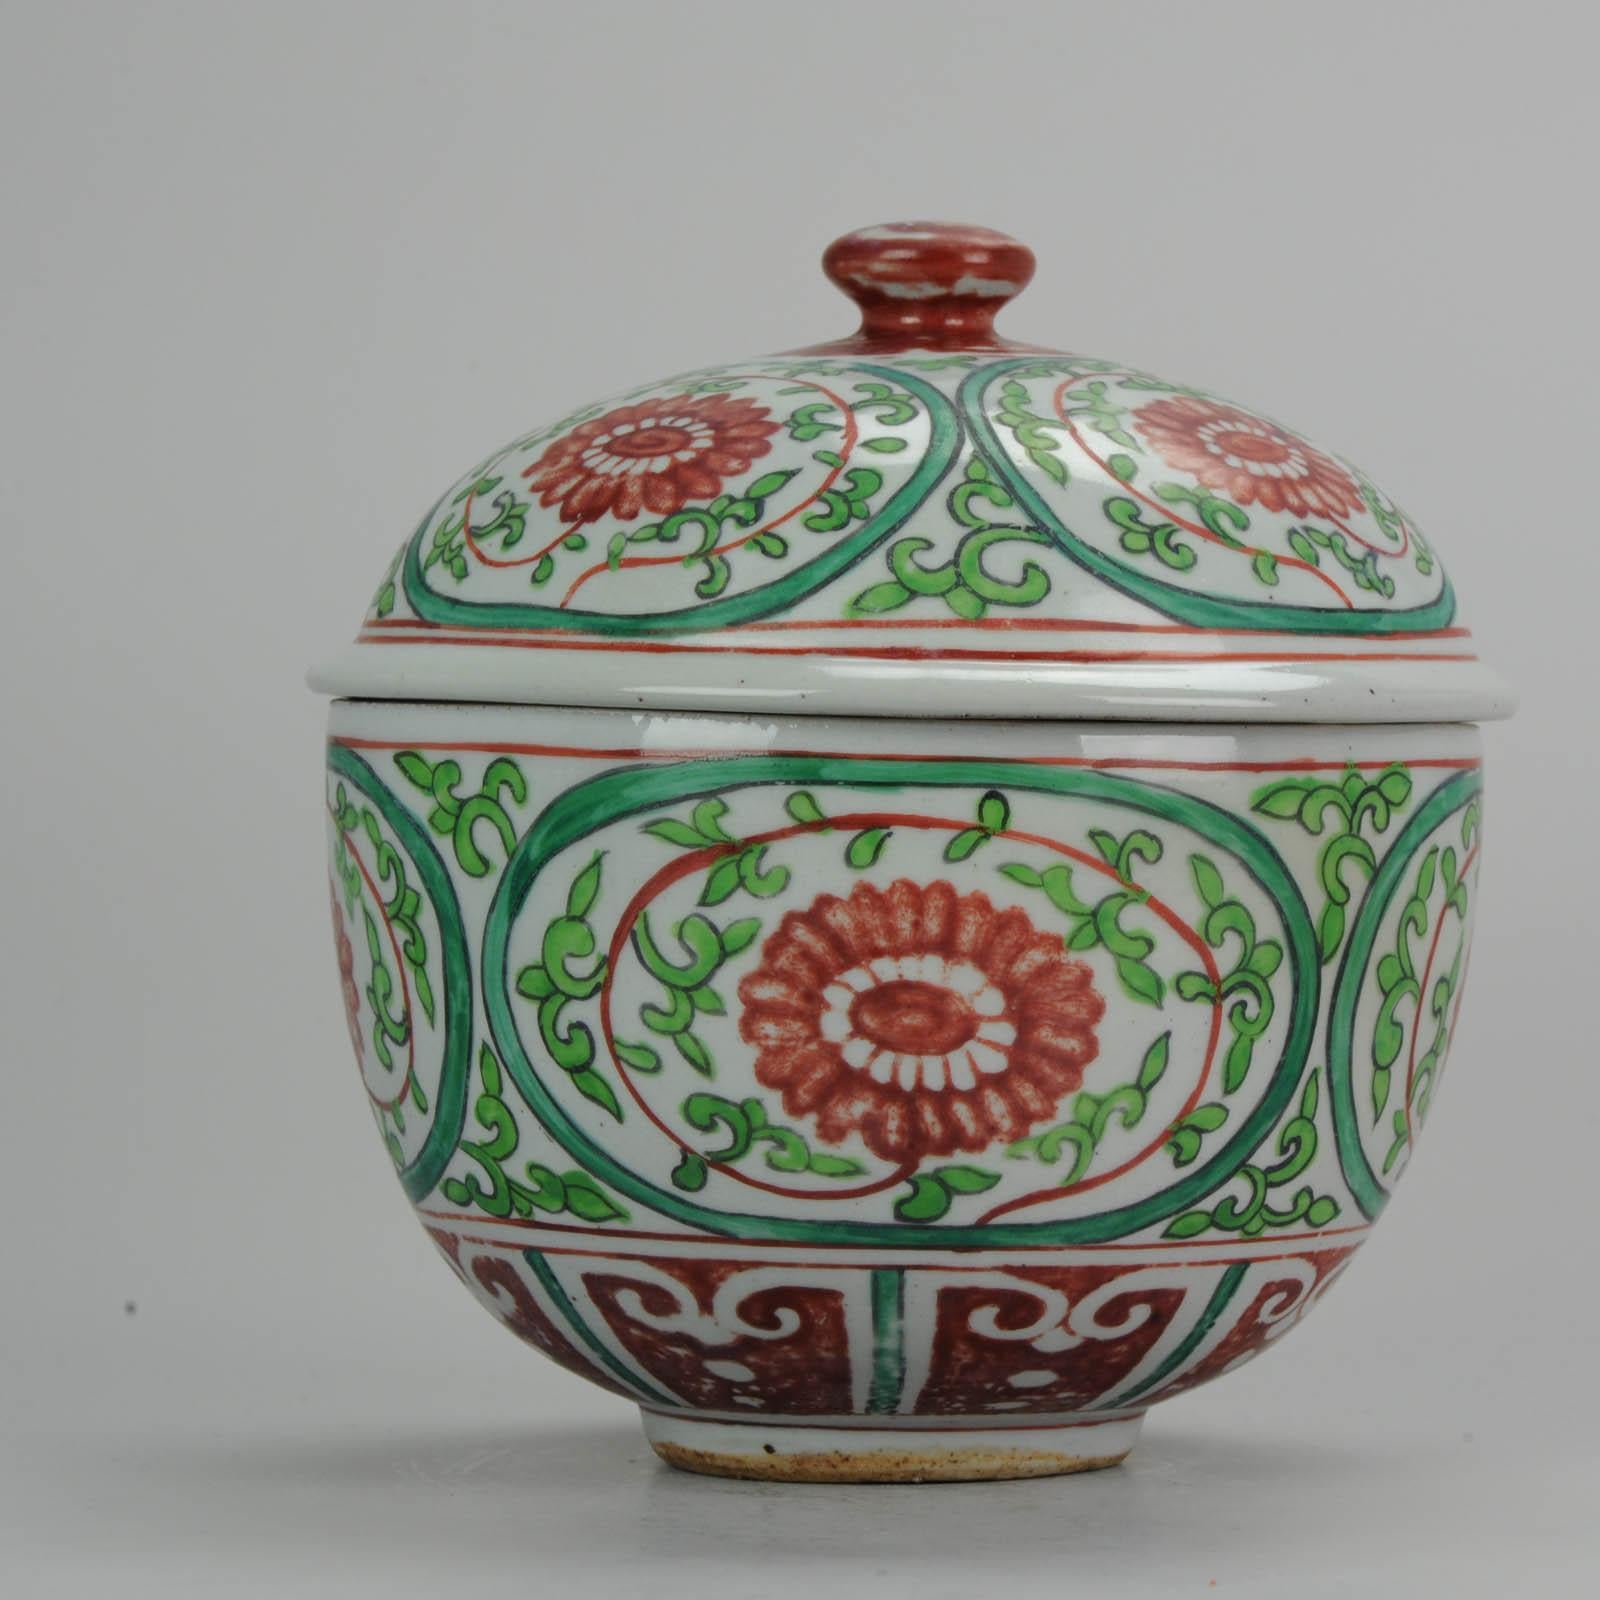 Antique Chinese Porcelain Jar 18th Century SE Asian Thai Market Bencharong Peony For Sale 5